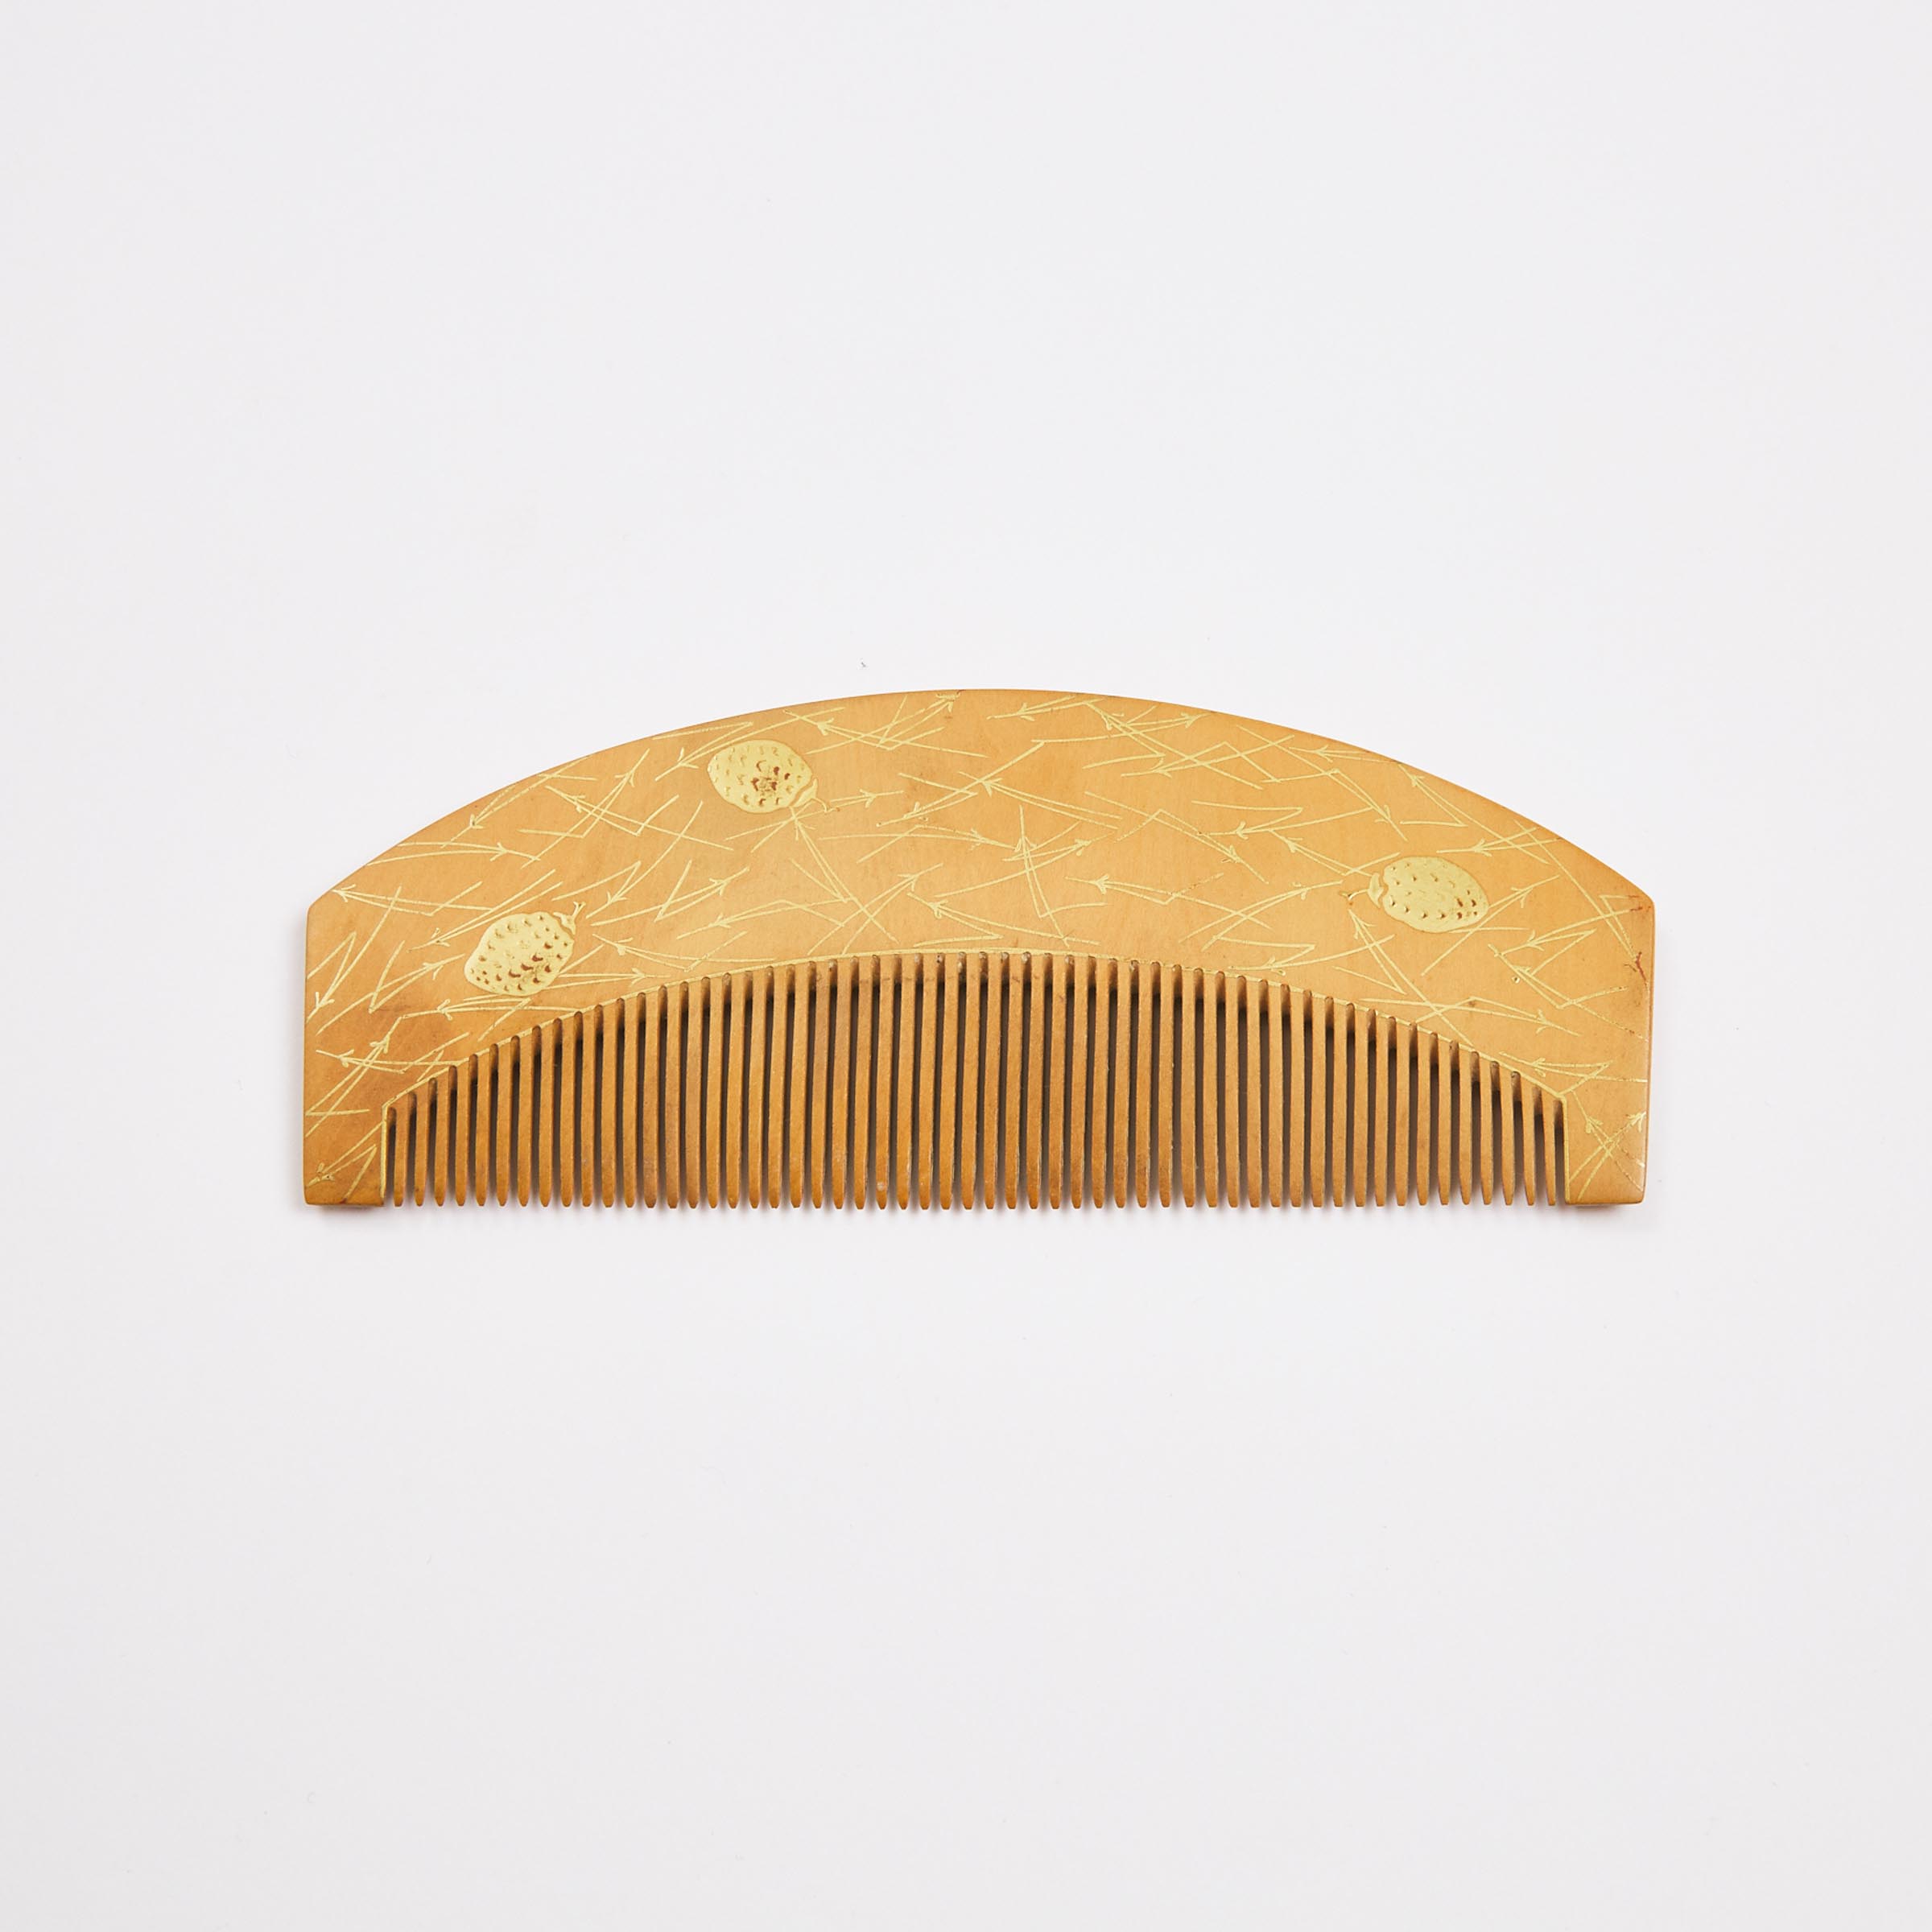 A Japanese Boxwood Comb (Kushi) with Berry Design in Gold, Meiji Period